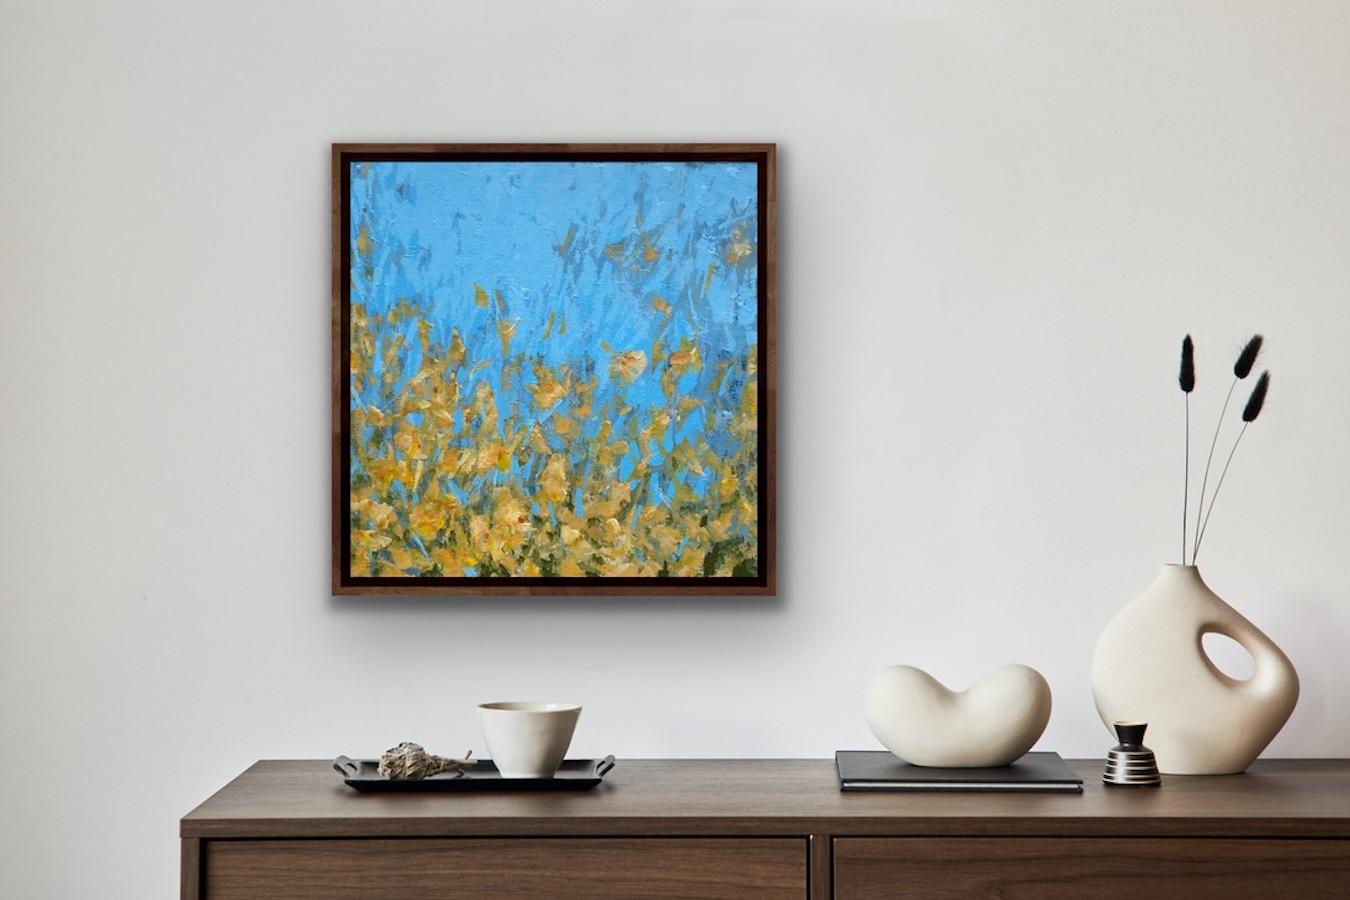 Gorse 1 by Jo Cottam [2021]
original and hand signed by the Artist
Acrylic on cradled board
Image size: H:30 cm x W:30 cm
Complete Size of Unframed Work: H:30 cm x W:30 cm x D:2cm
Frame Size: H:33 cm x W:33 cm x D:4cm
Sold Framed
Please note that